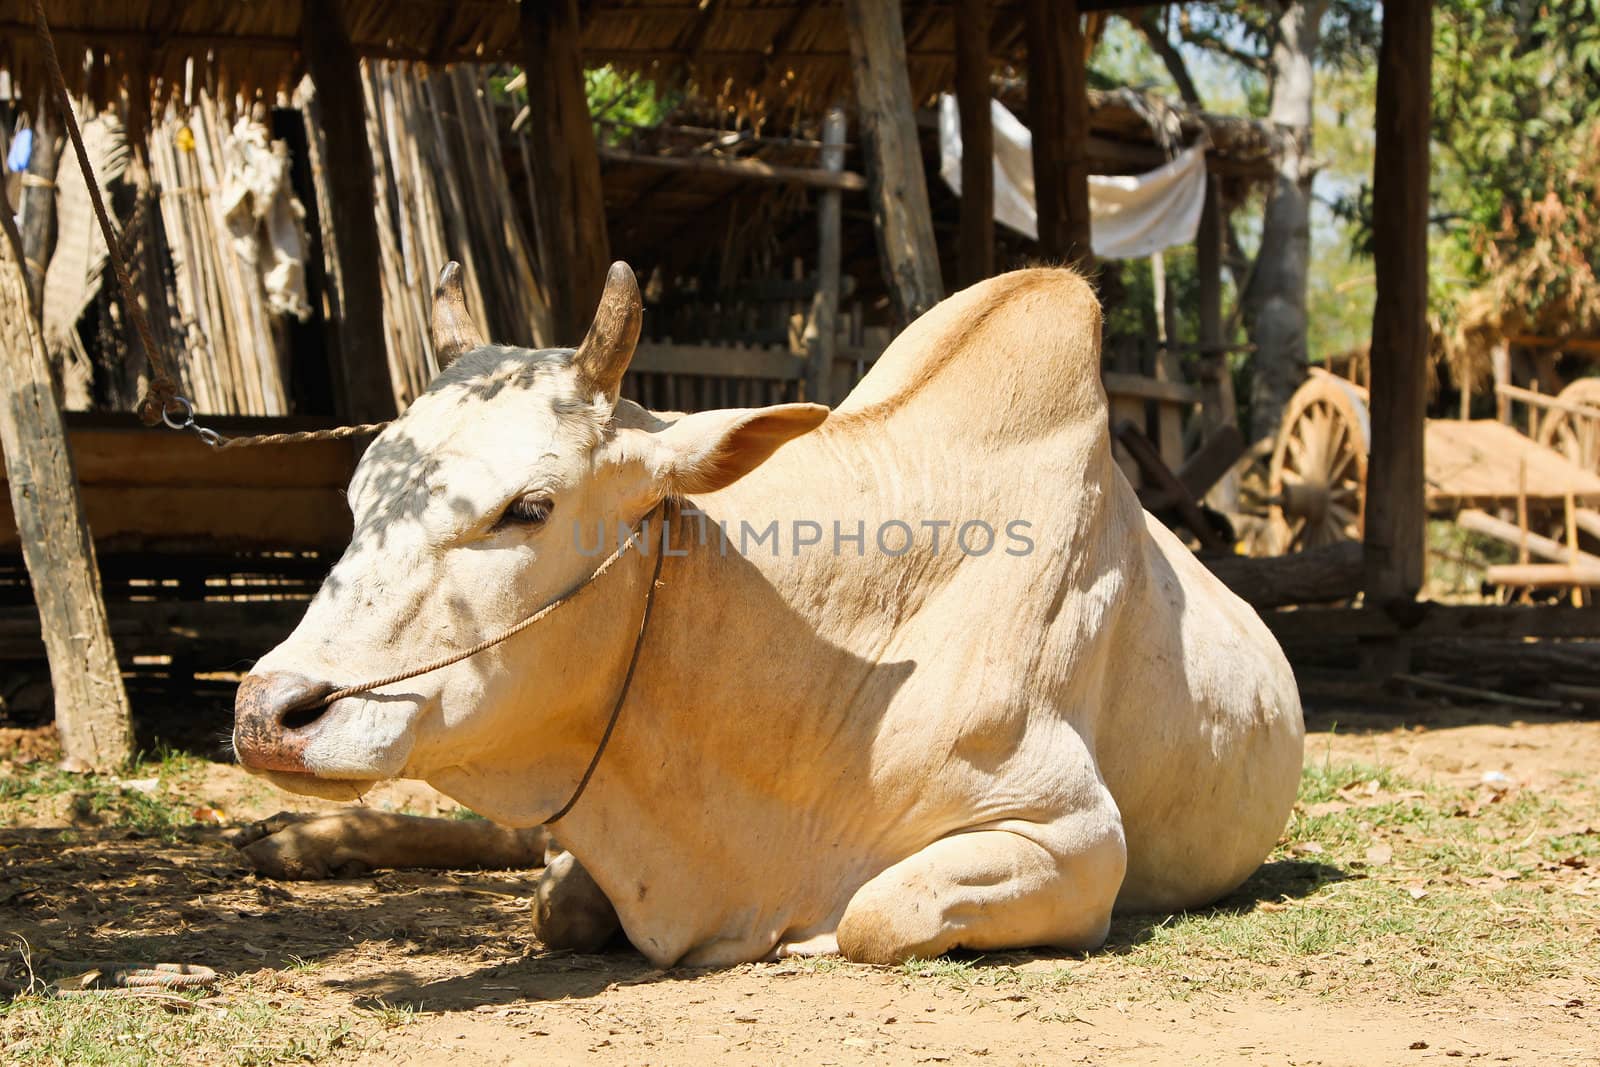 Cow or Ox  at rural farm, Burma by vanillaechoes